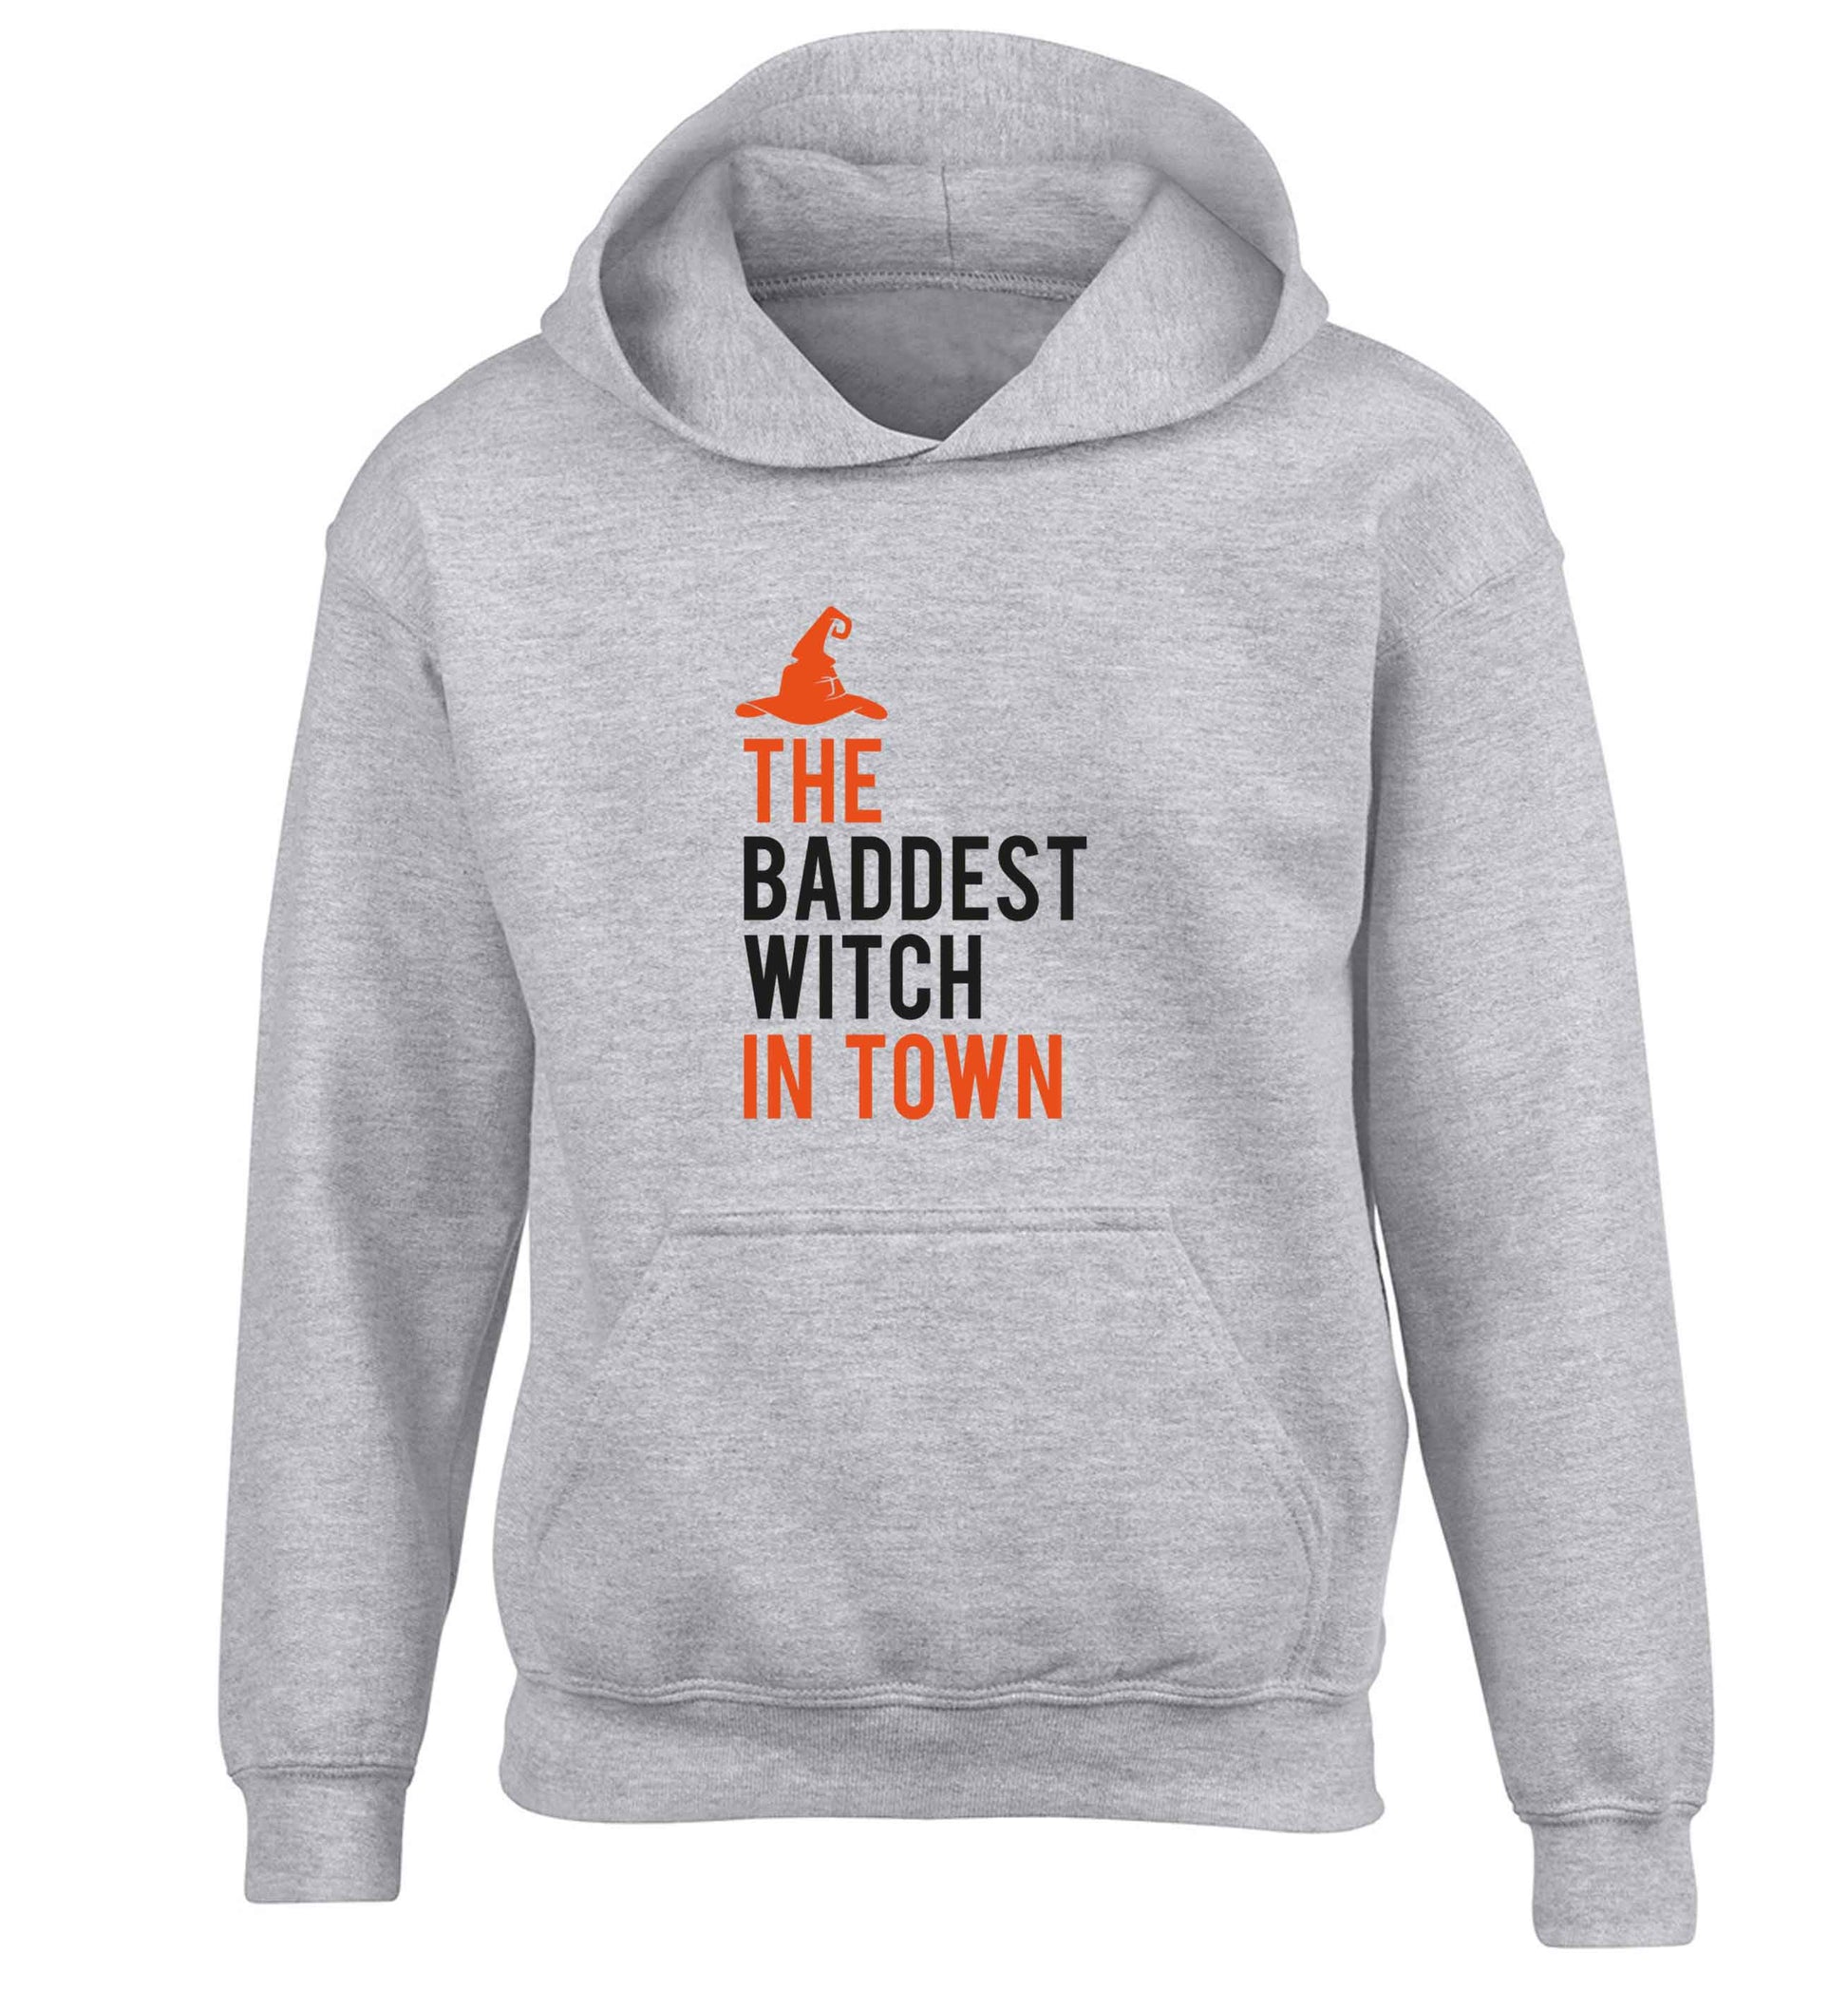 Badest witch in town children's grey hoodie 12-13 Years